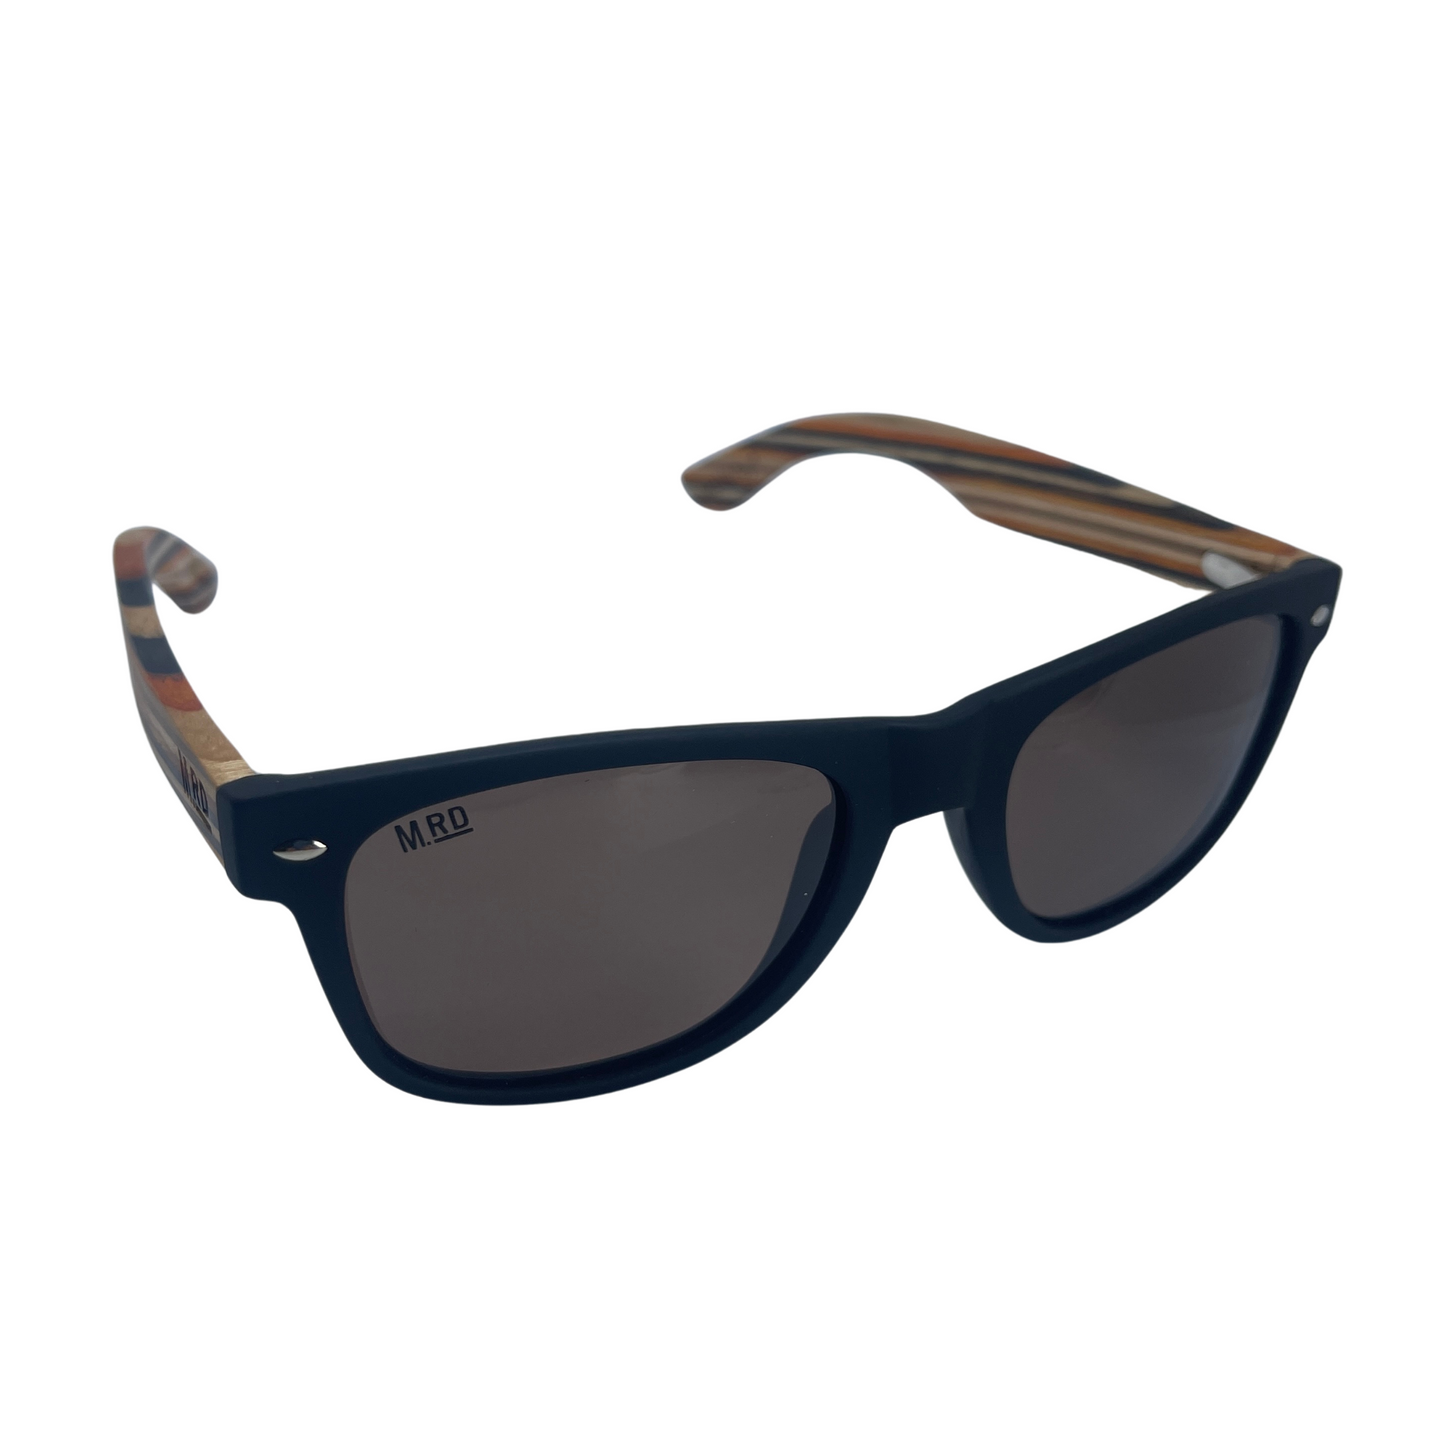 Black frame sunglasses with wooden striped arms.